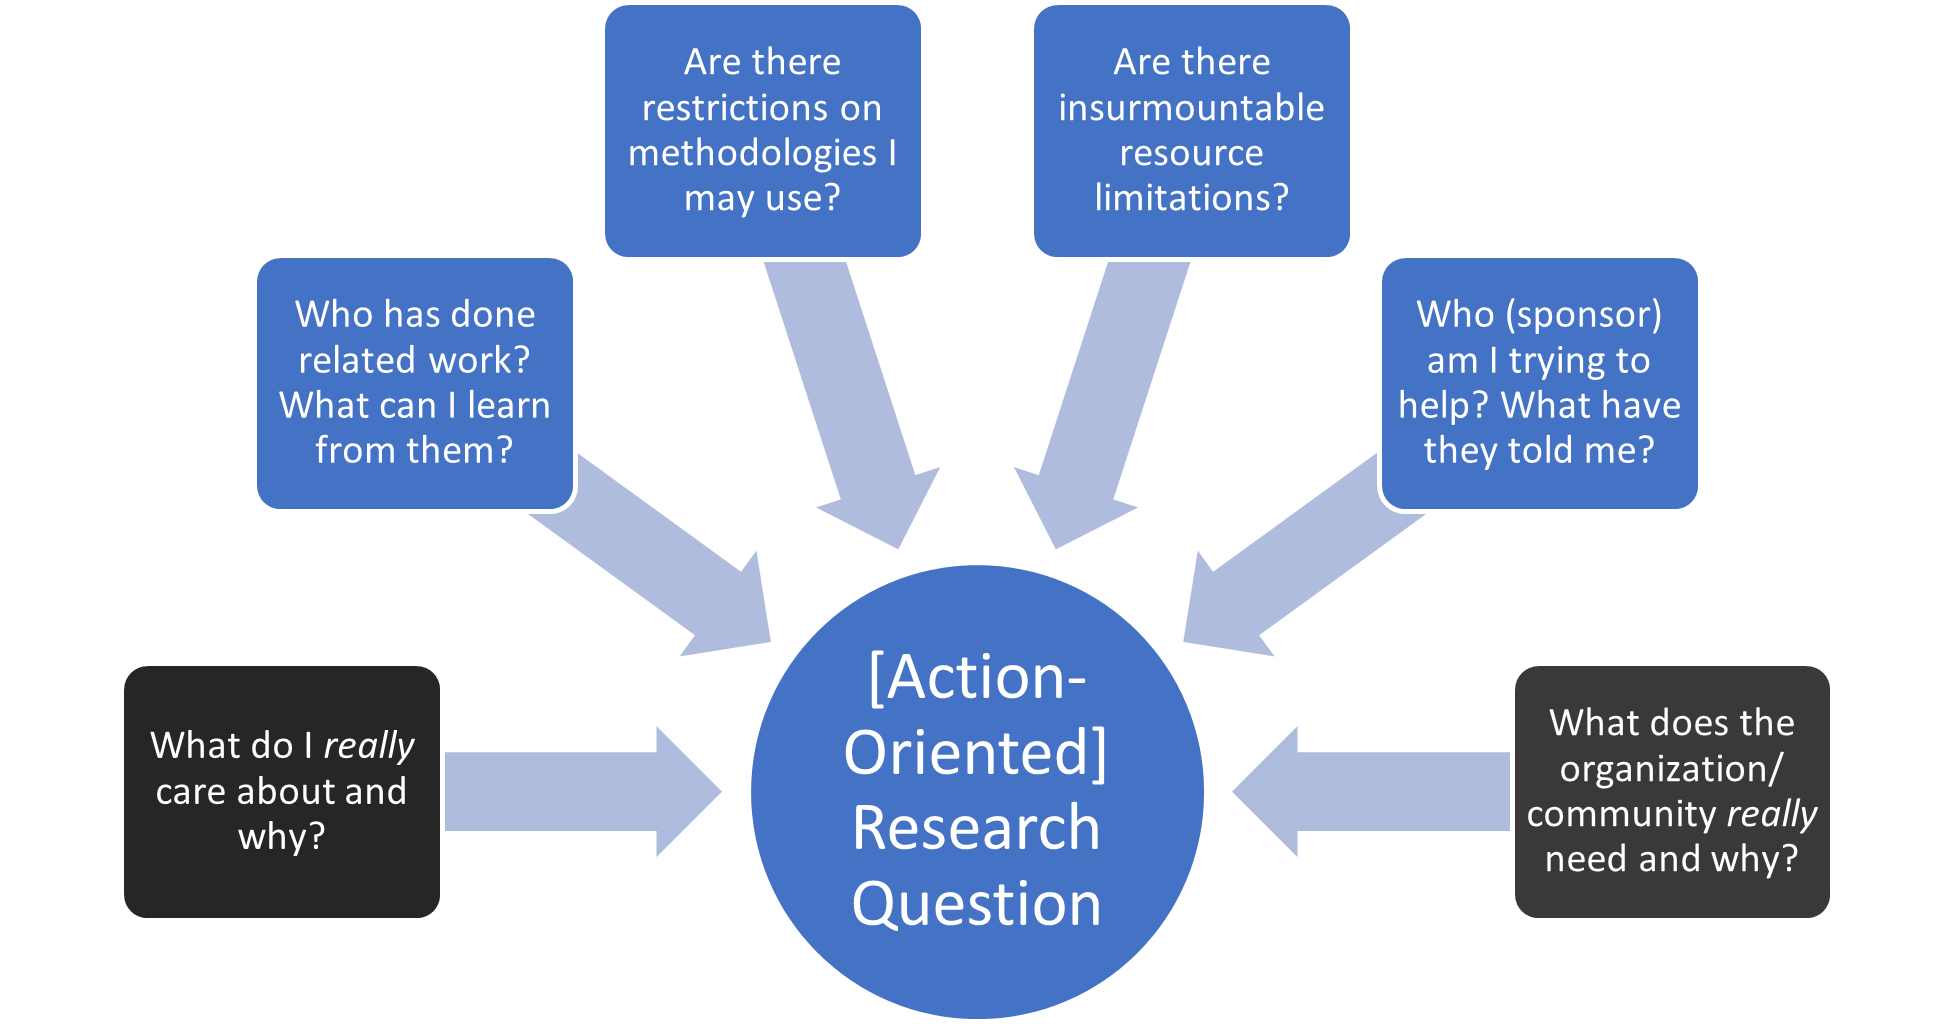 Action-Oriented Research Question: What do I really care about and why? Who has done related work? What can I learn from them? Are there restrictions on methodologies I may use? Are there insurmountable resource limitations? Who (sponsor) am I trying to help? What have they told me? What does the organization/ community really need and why?